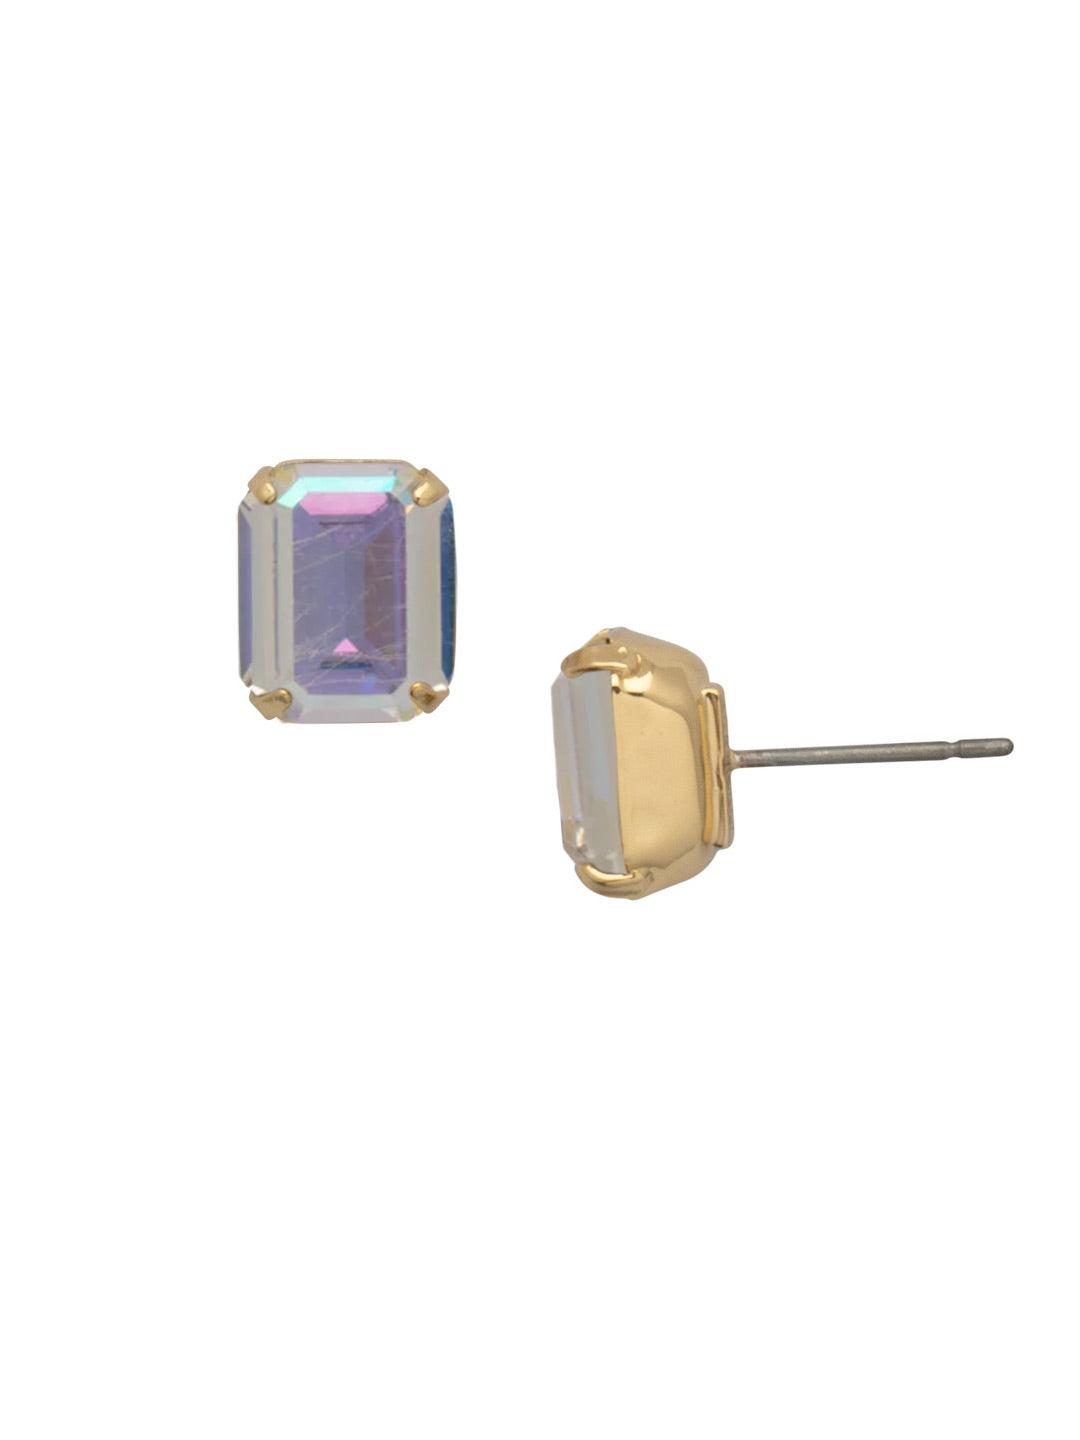 Octavia Stud Earrings - EDU53BGCAB - <p>These rounded emerald cut stud earrings can be worn alone or paired with anything for just a bit of extra bling! From Sorrelli's Crystal Aurora Borealis collection in our Bright Gold-tone finish.</p>